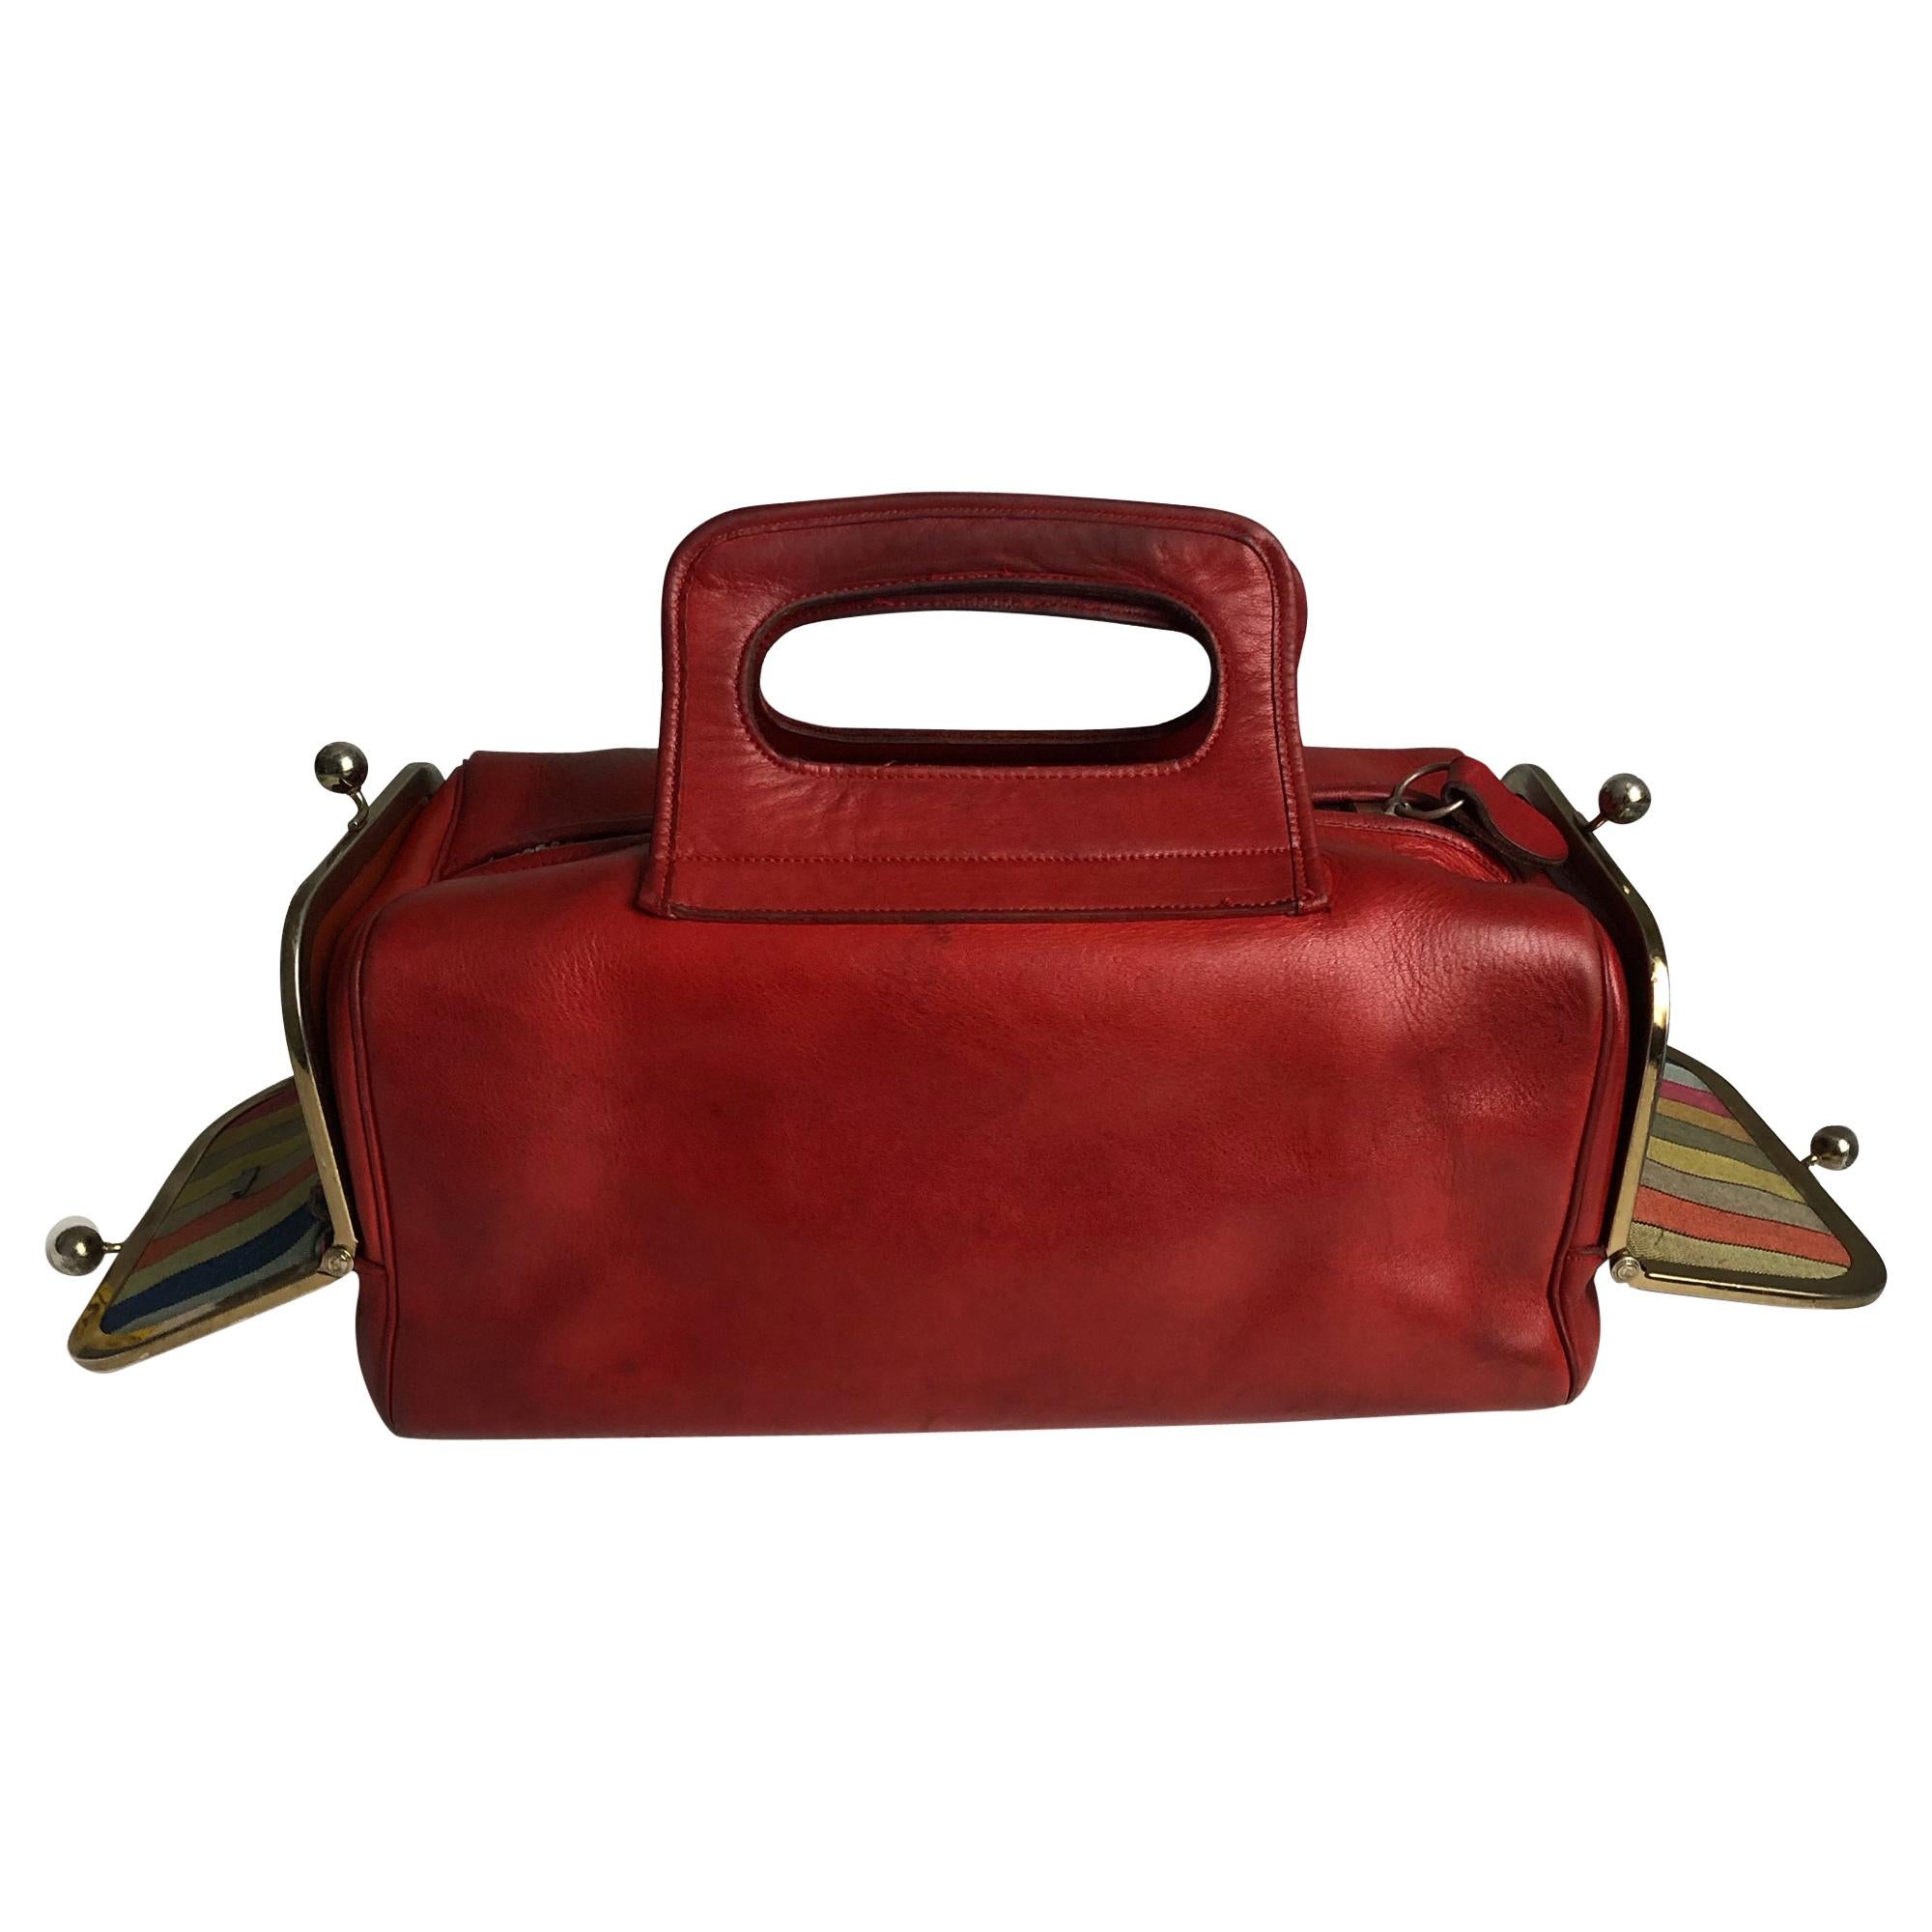 Preowned, vintage Bonnie Cashin for Coach Leatherware 'Double Header' tote bag with kiss locks, likely made in the 60s.  Made from red leather, there's a kiss lock pocket on each side and a zippered main compartment, all lined in Cashin's signature